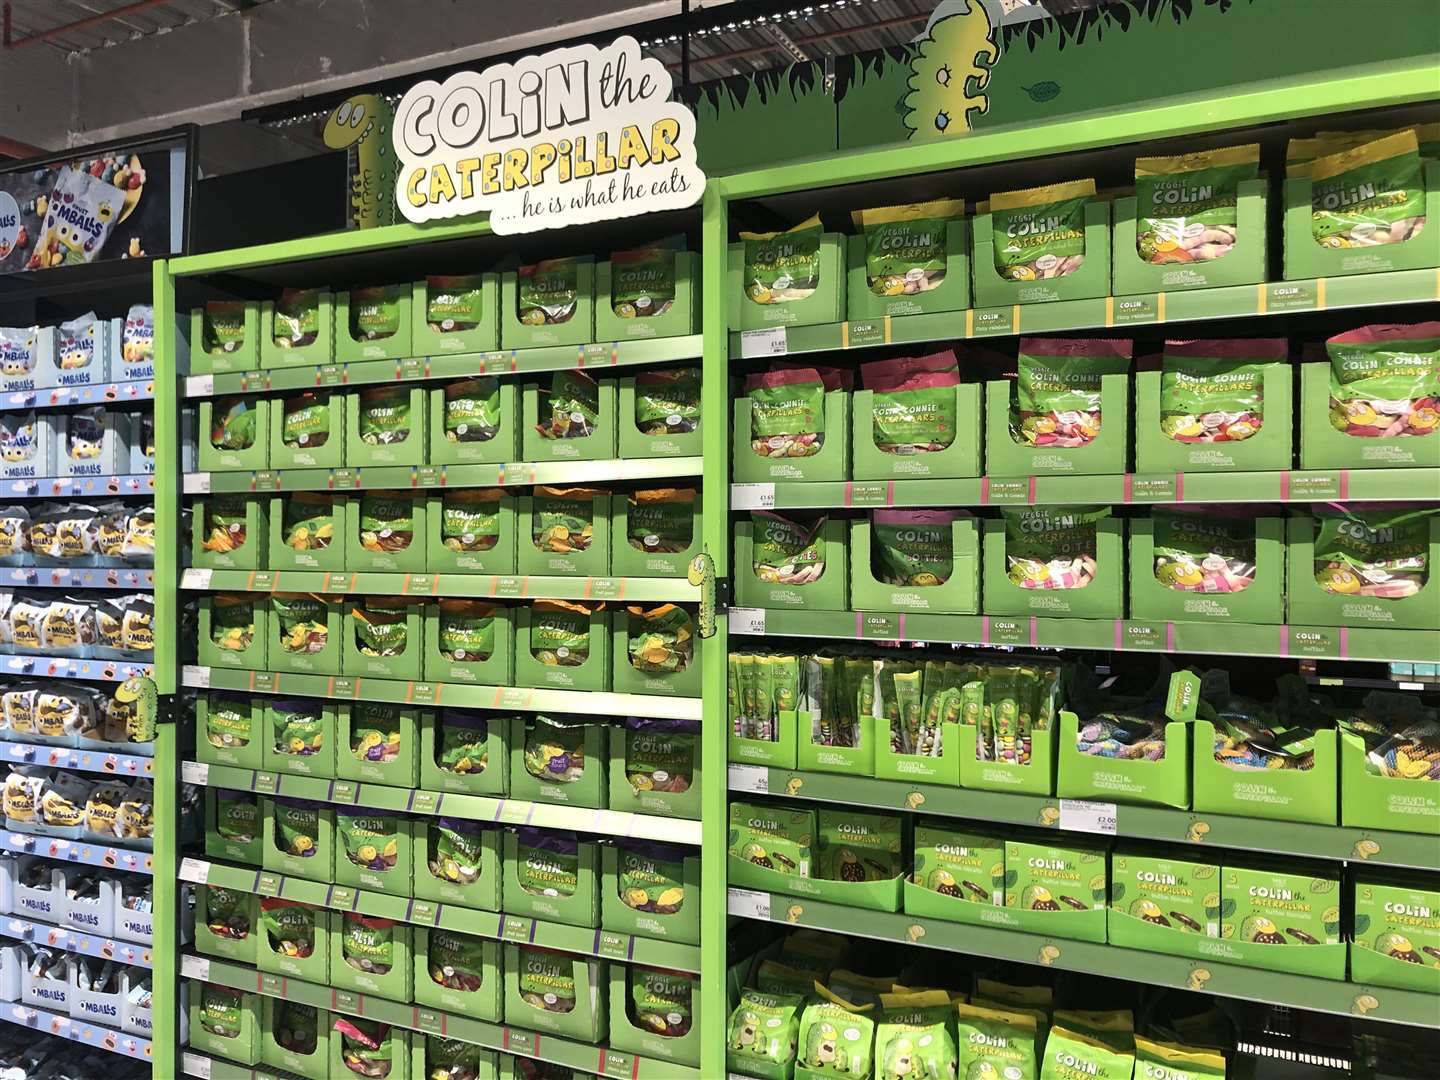 Colin the Caterpillar and Percy Pig have their own aisles